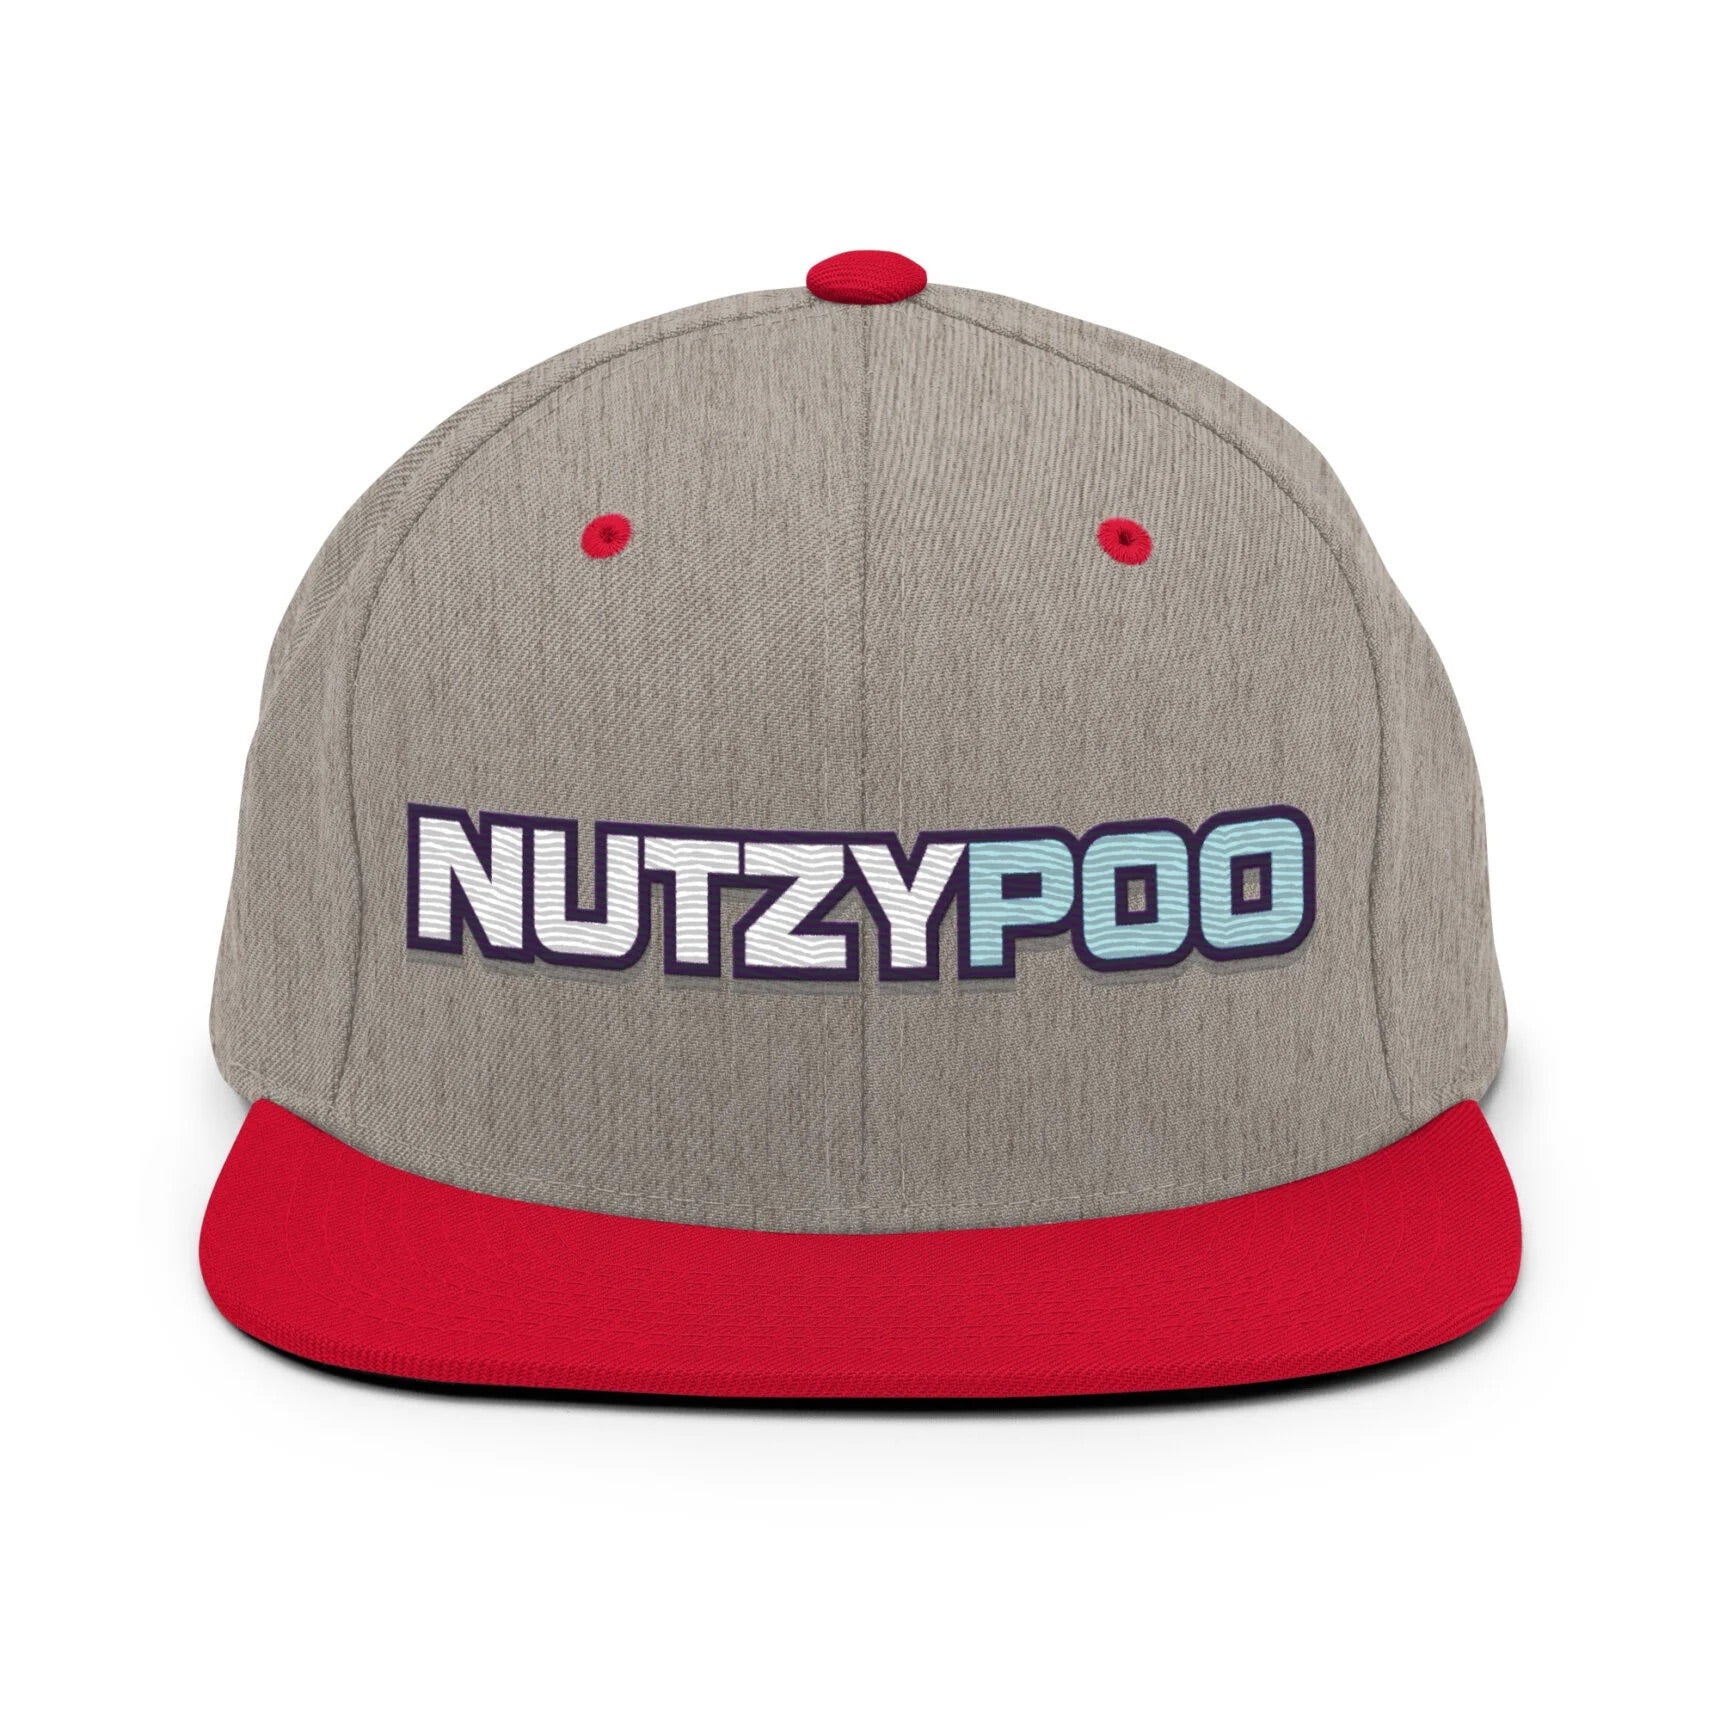 NutzyPoo ShowZone hat in heather grey with red brim and accents